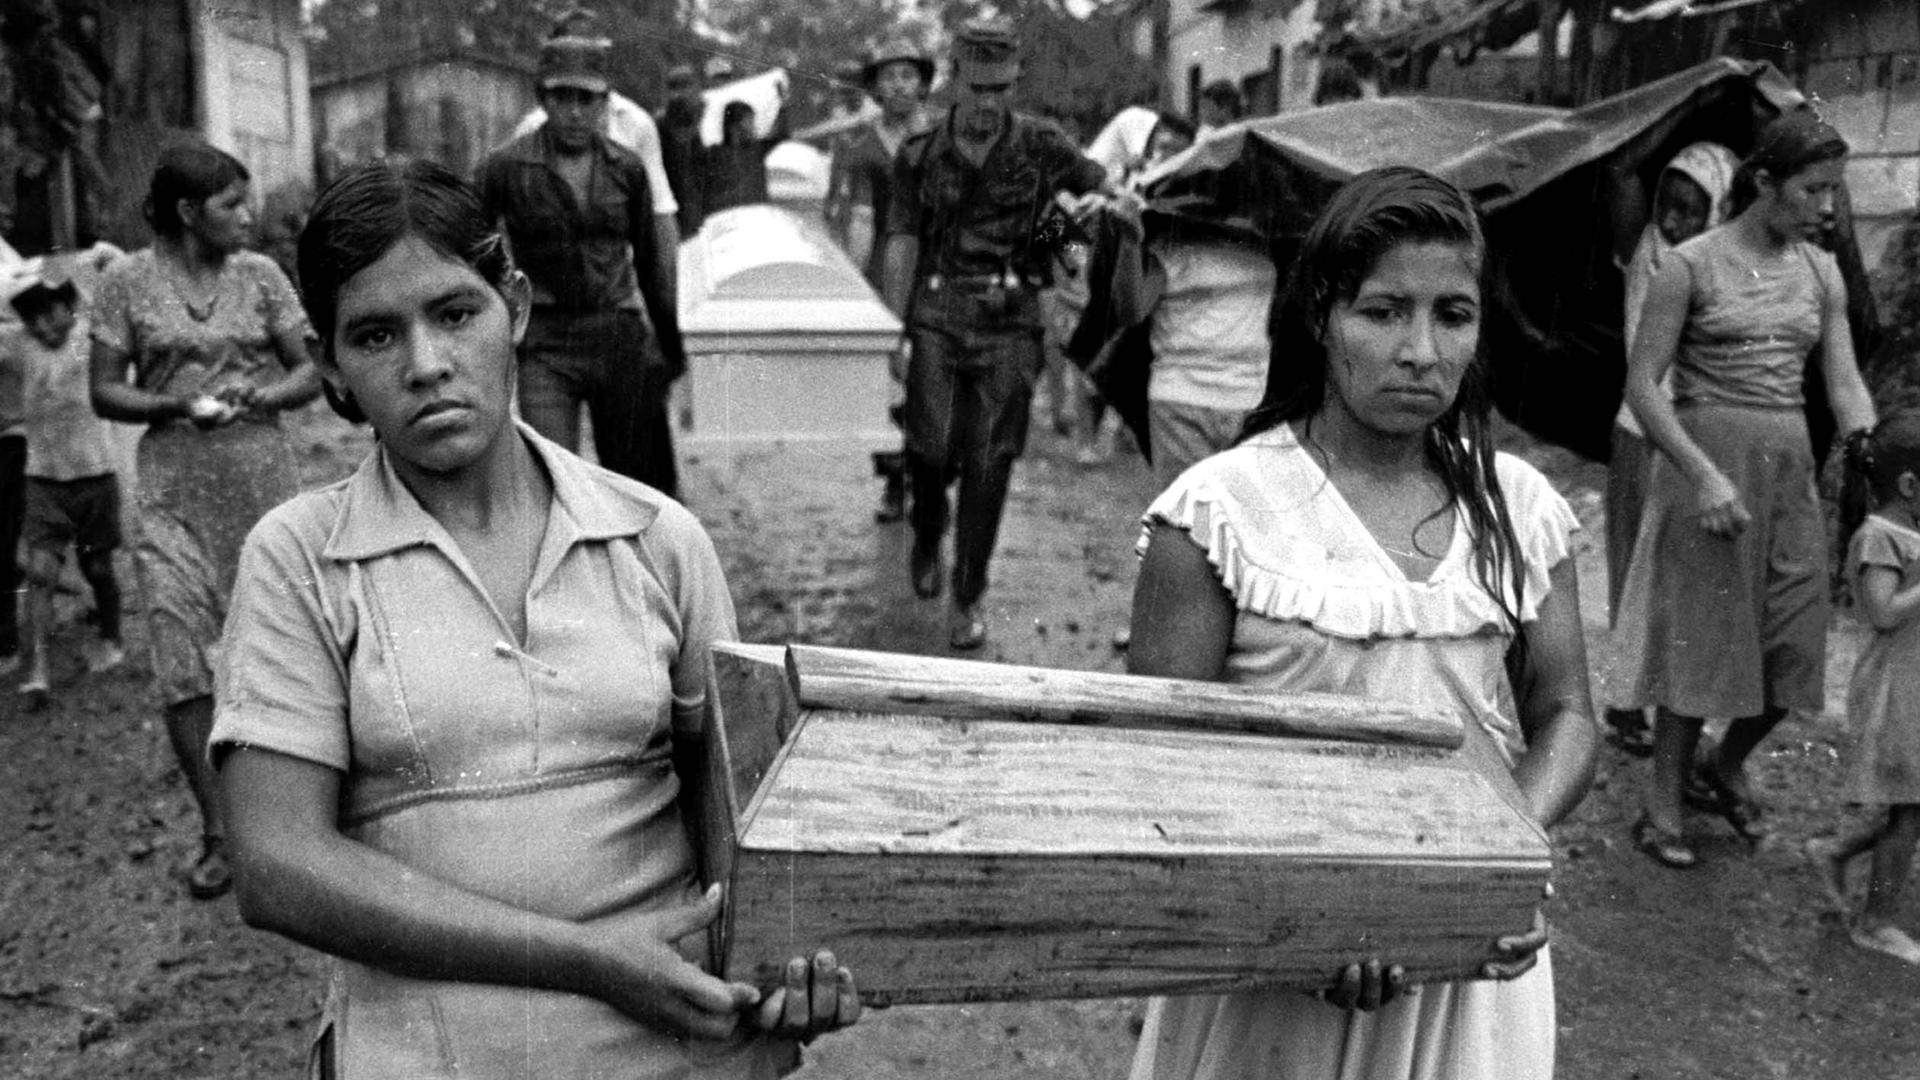 Two young women carry a small coffin between them. Black and white photo.